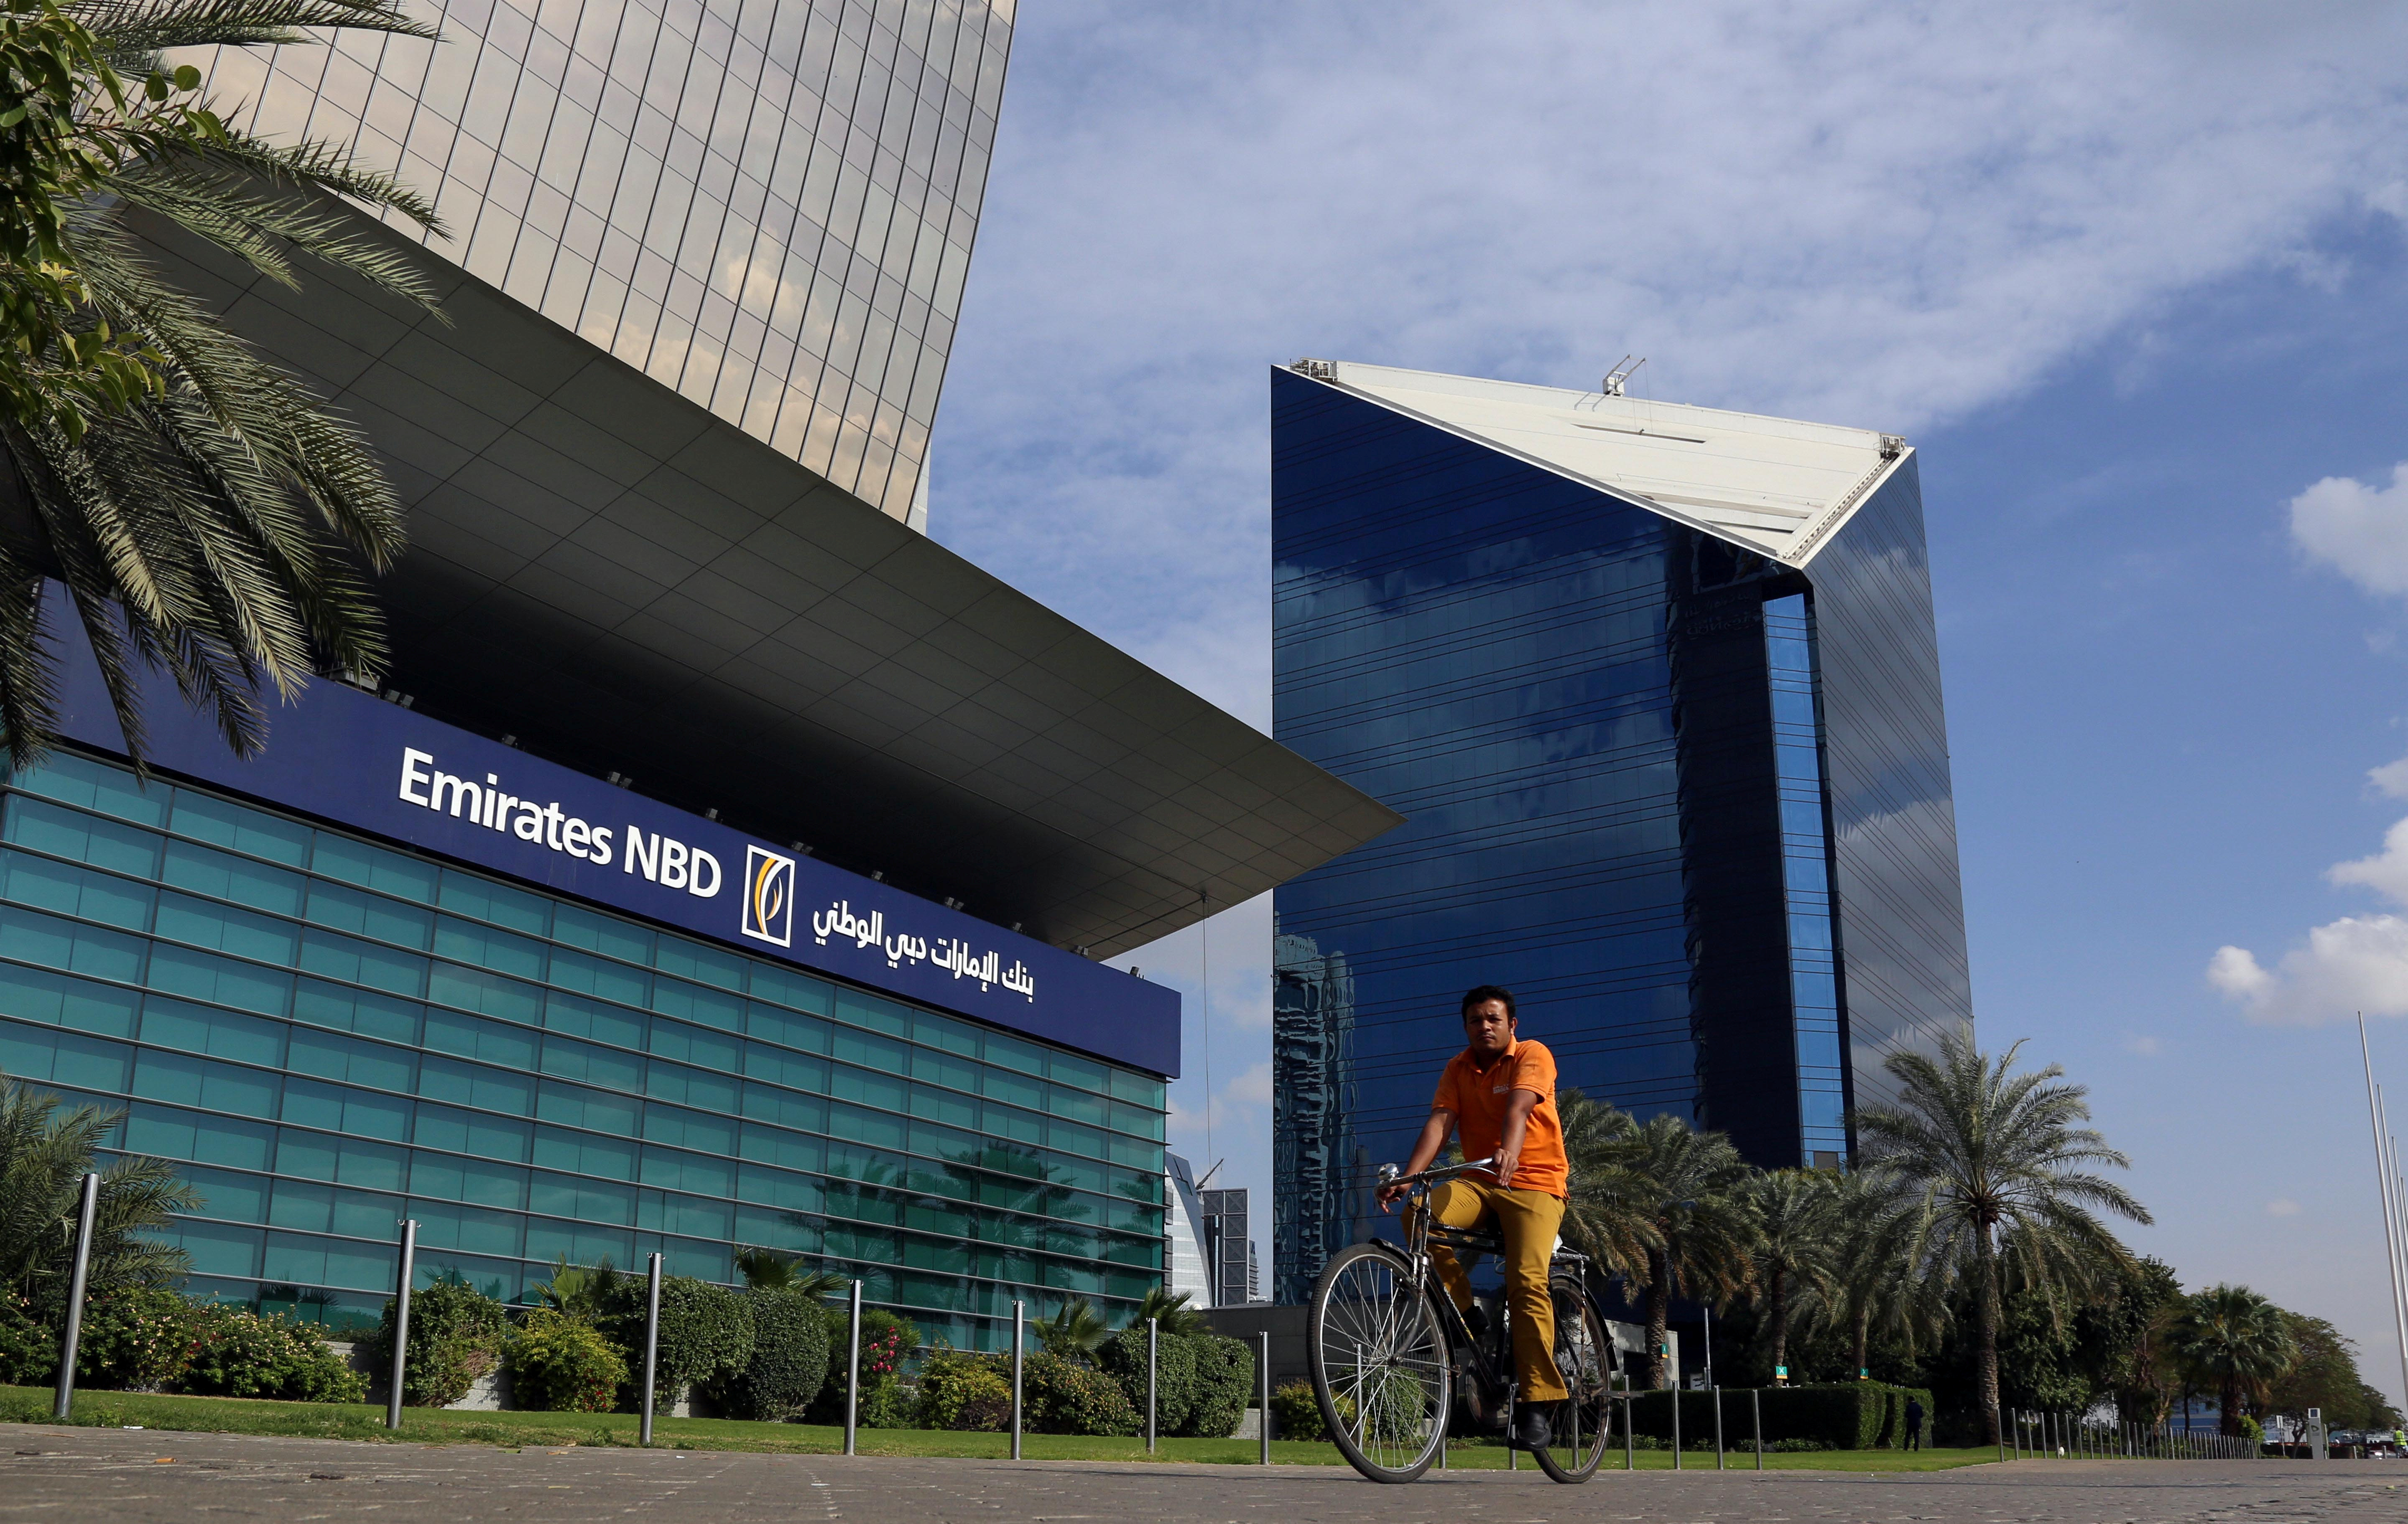 A man rides a bicycle past Emirates NBD head office in Dubai